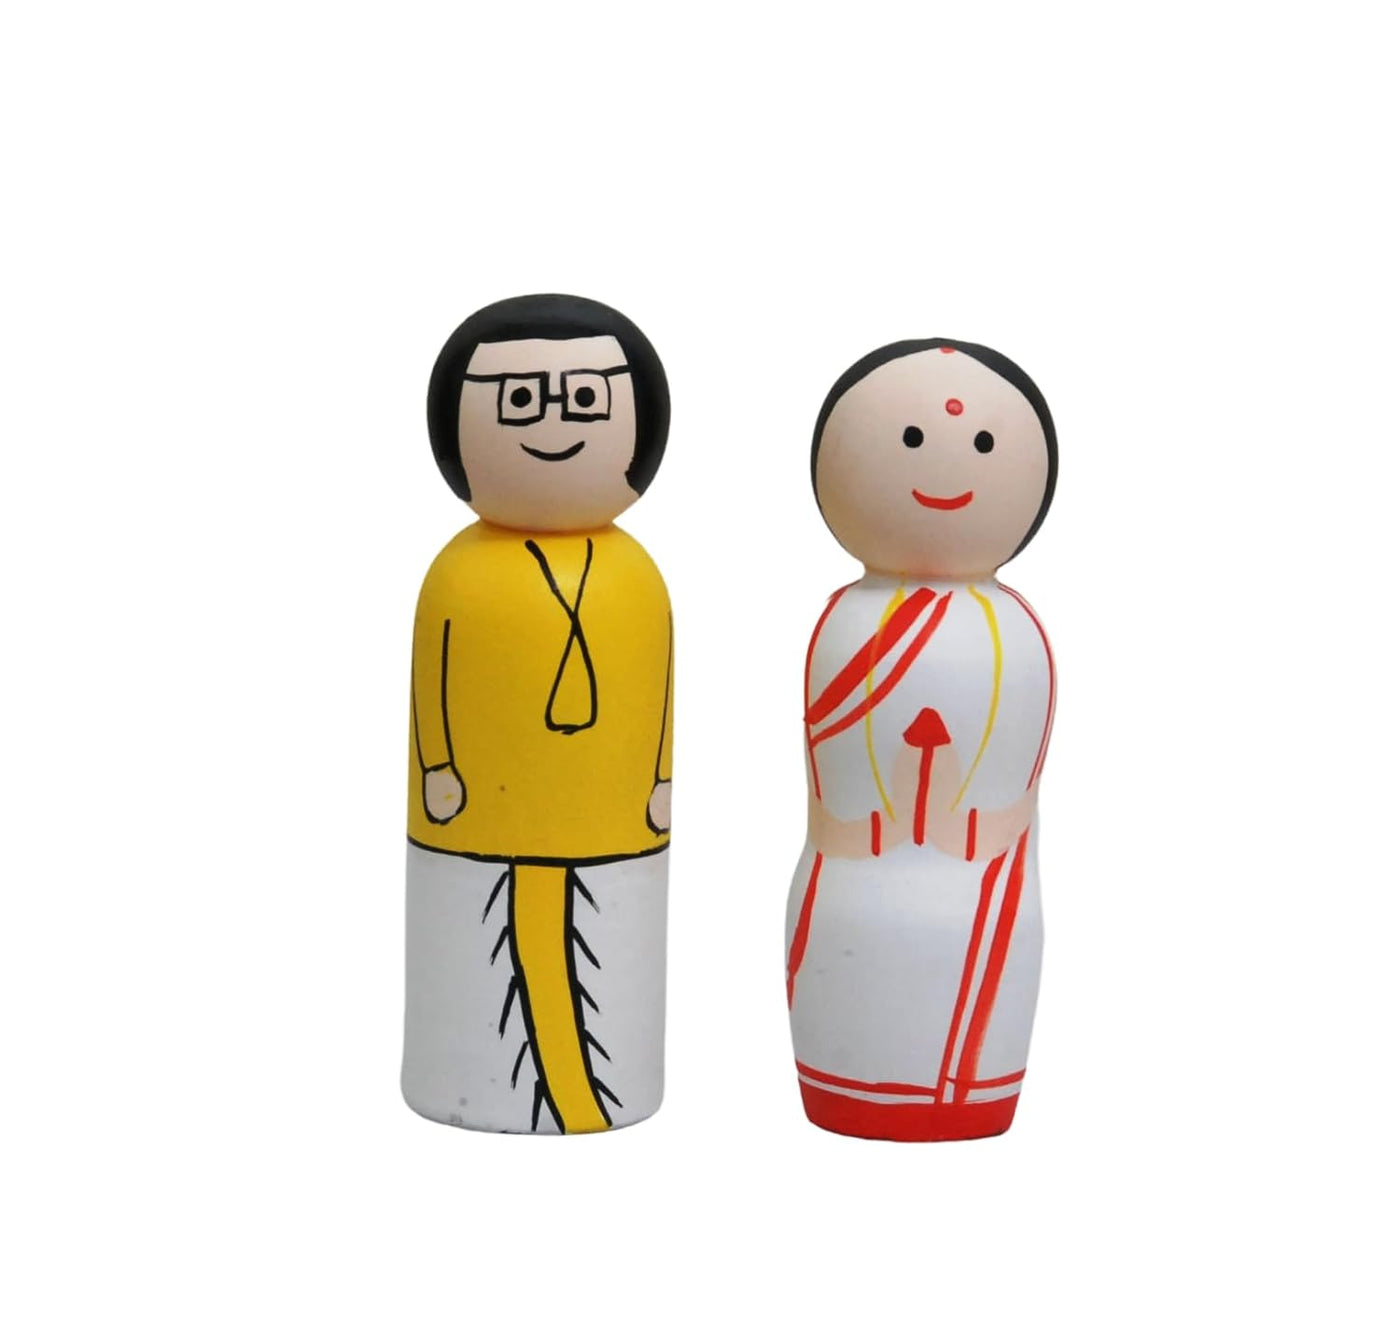 Wooden Peg Dolls Bengali Couple Non Toxic Colors (2 Years+) - Set of 2 Wooden Dolls | Pretend Play, Open Ended Toys, Improves Childs Creativity